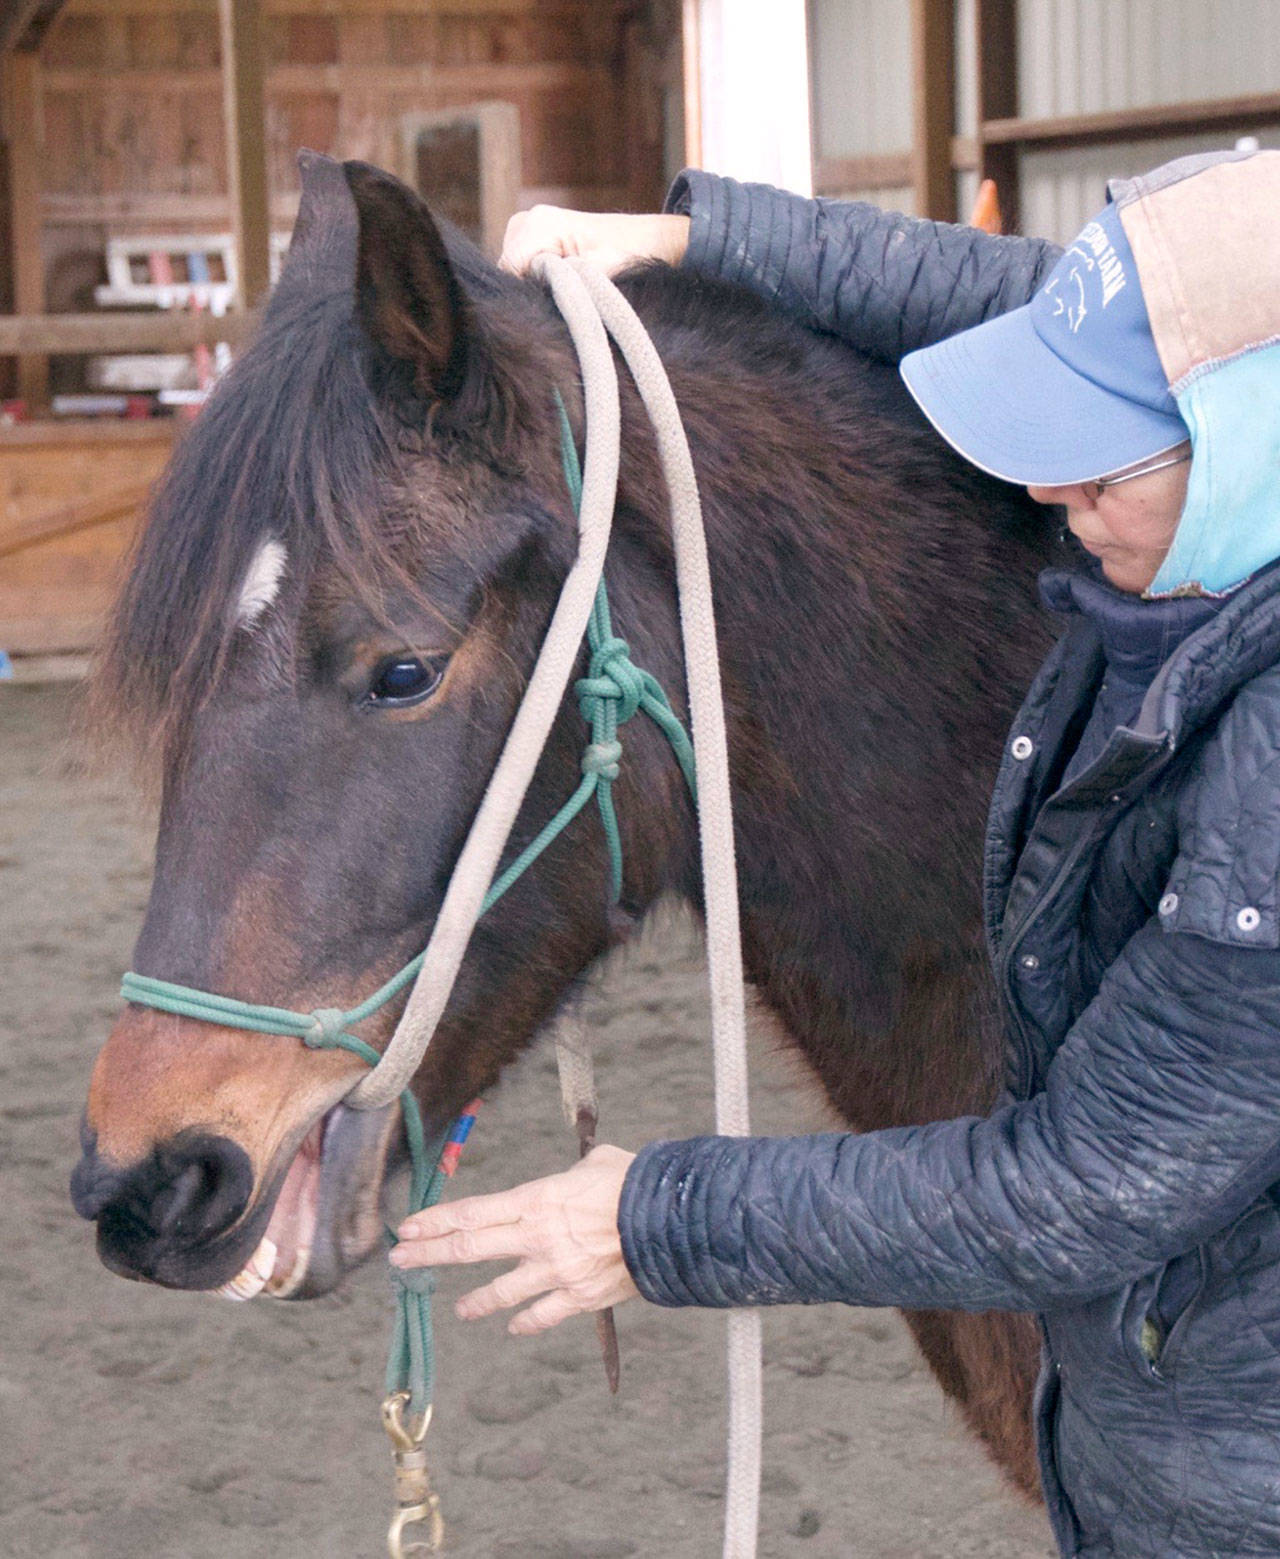 Freedom Farm owner Mary Gallagher shares her insights on teaching patterns related to teaching a horse to accept the bridle via her blog on her websie at &lt;a href="https://www.freedom-farm.net/" target="_blank"&gt;Freedom-farm.net&lt;/a&gt;. (Mary Tulin)